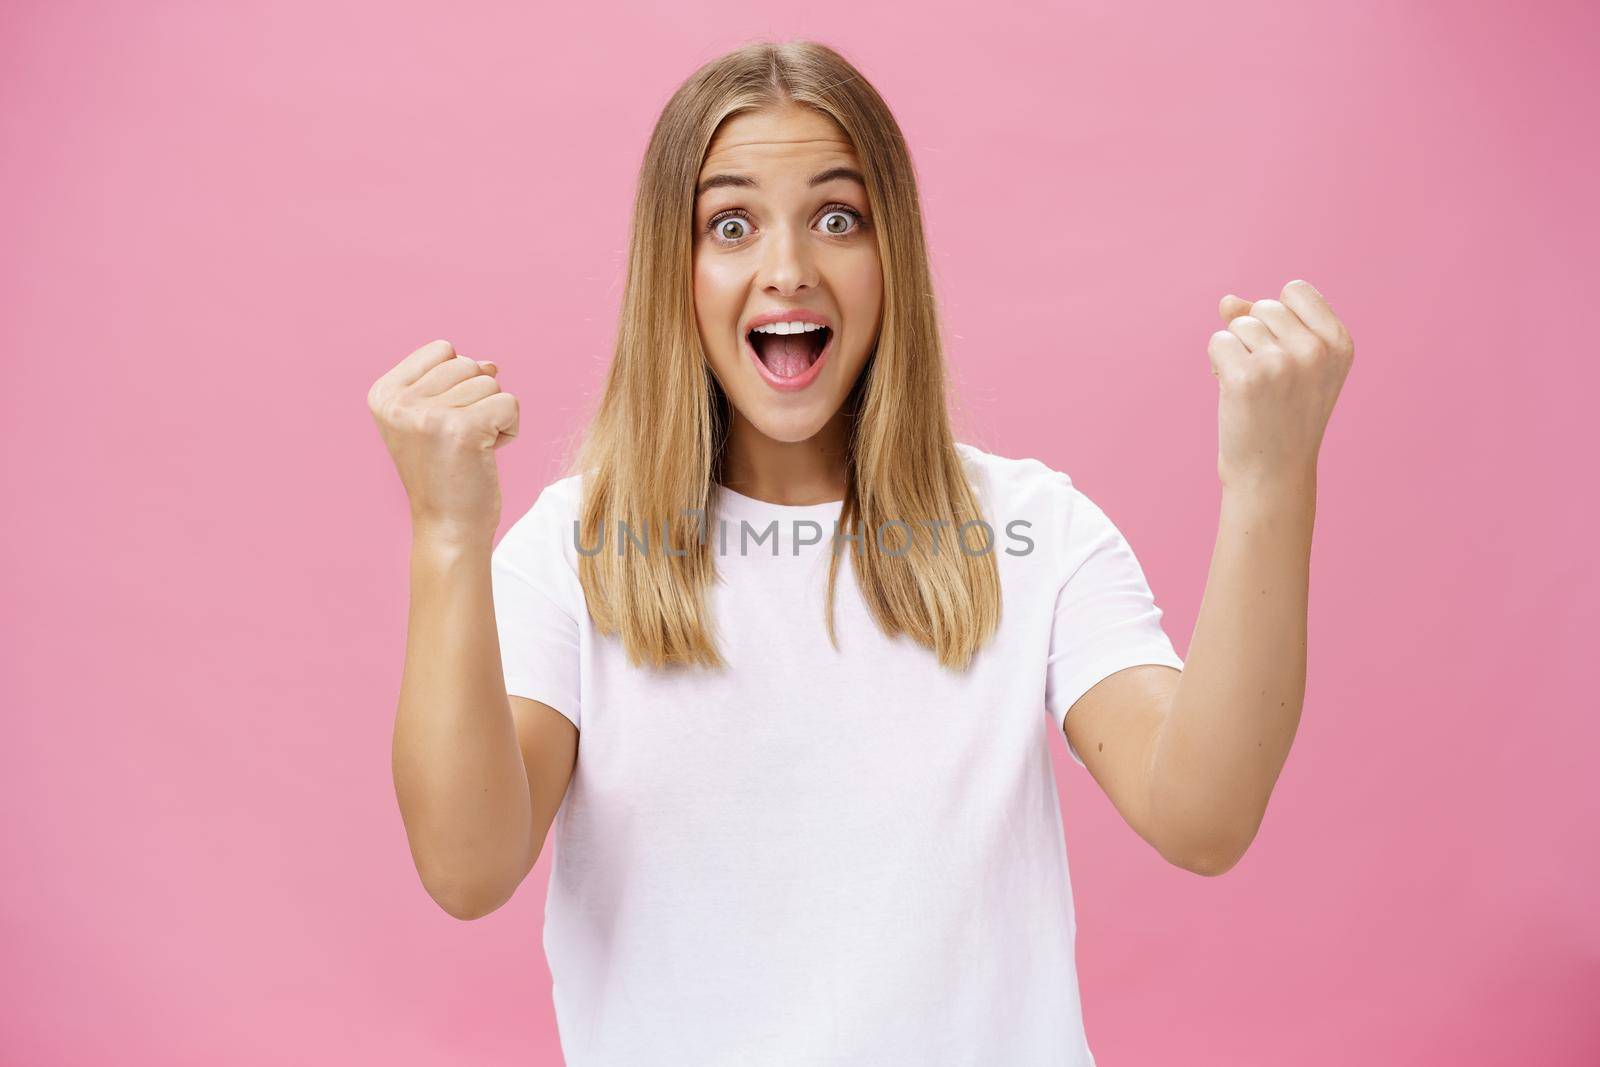 Excited cheerful and optimistic charming woman with fair hair in white t-shirt raising fists in victory and triumph yelling yes in success and amazement standing supportive against pink background. Lifestyle.